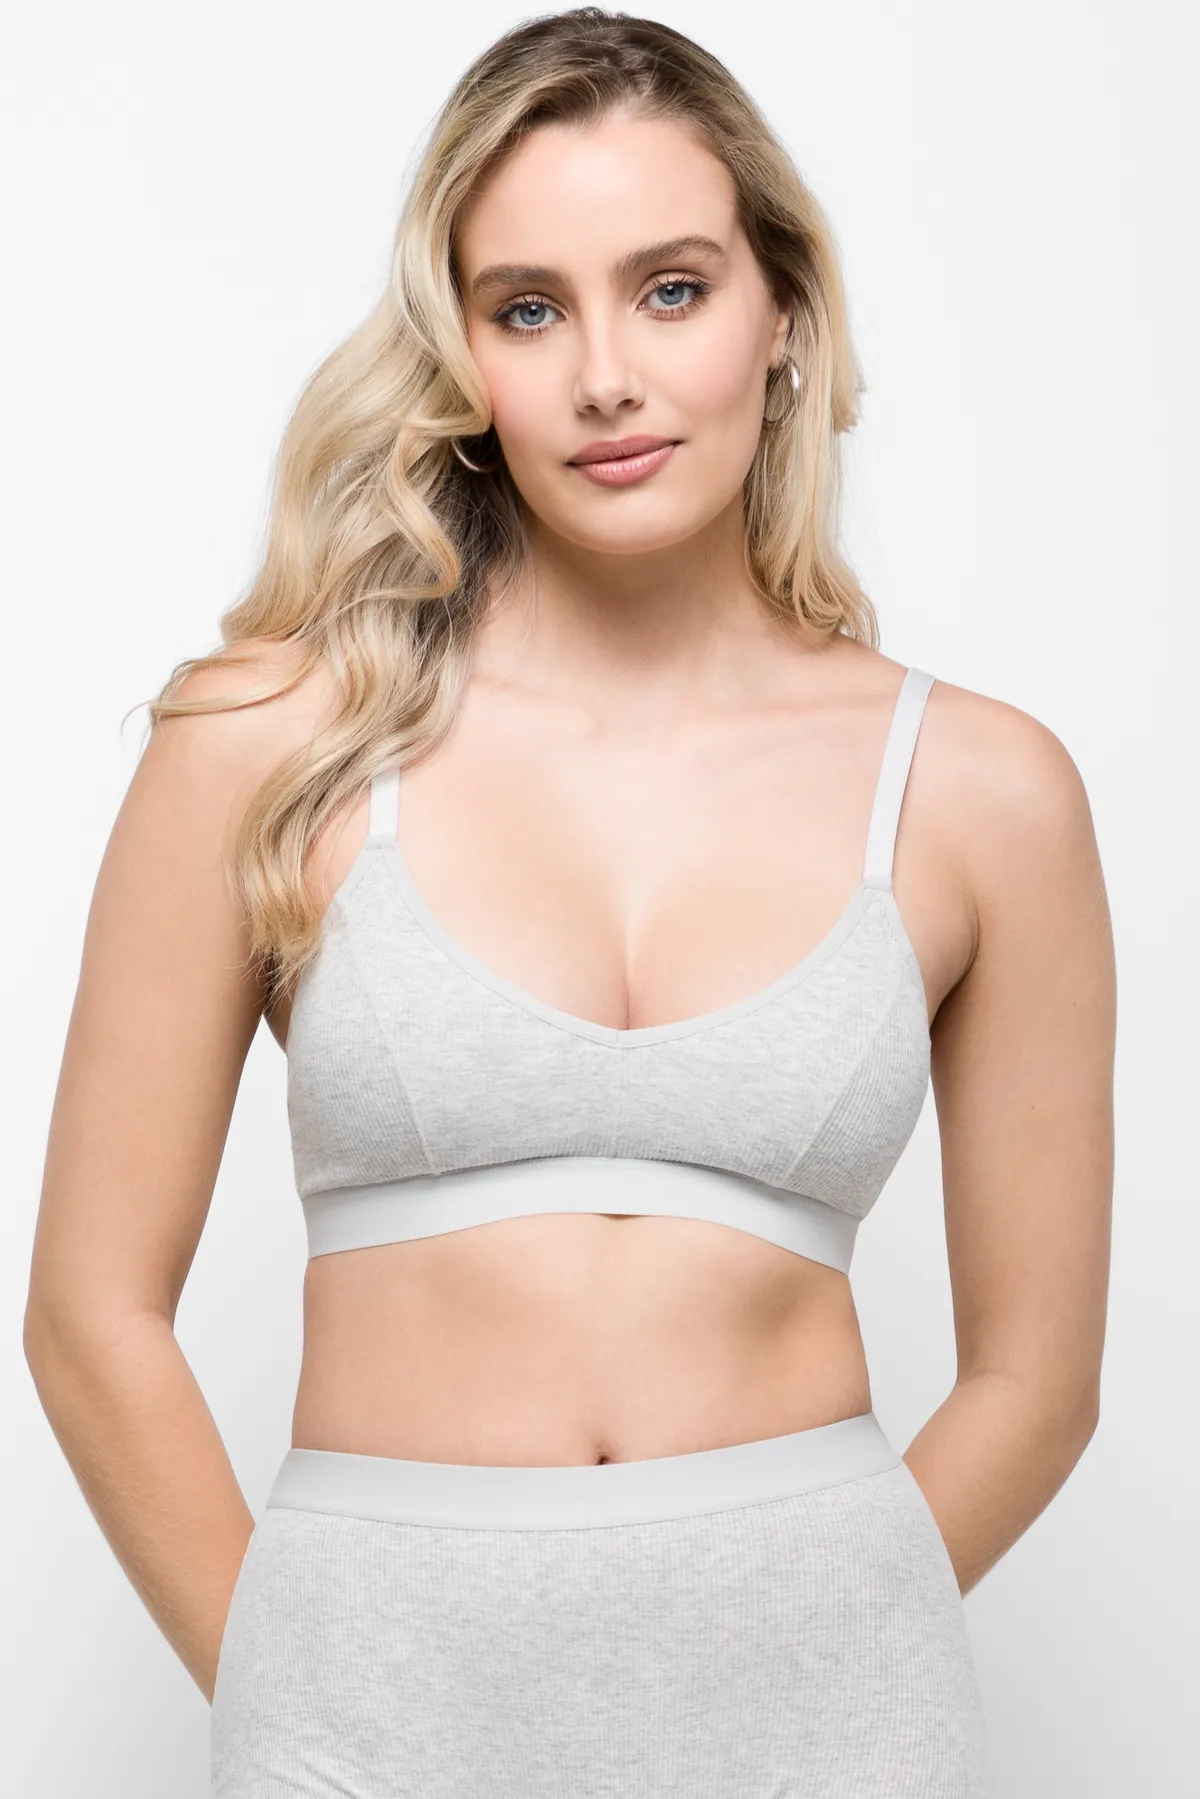 Mrat Cotton Bralettes for Women Woman'S Printing Gathered Together Daily  Bra Underwear No Rims Lace Bralette Topss for Women S-195 Gray 2Xl